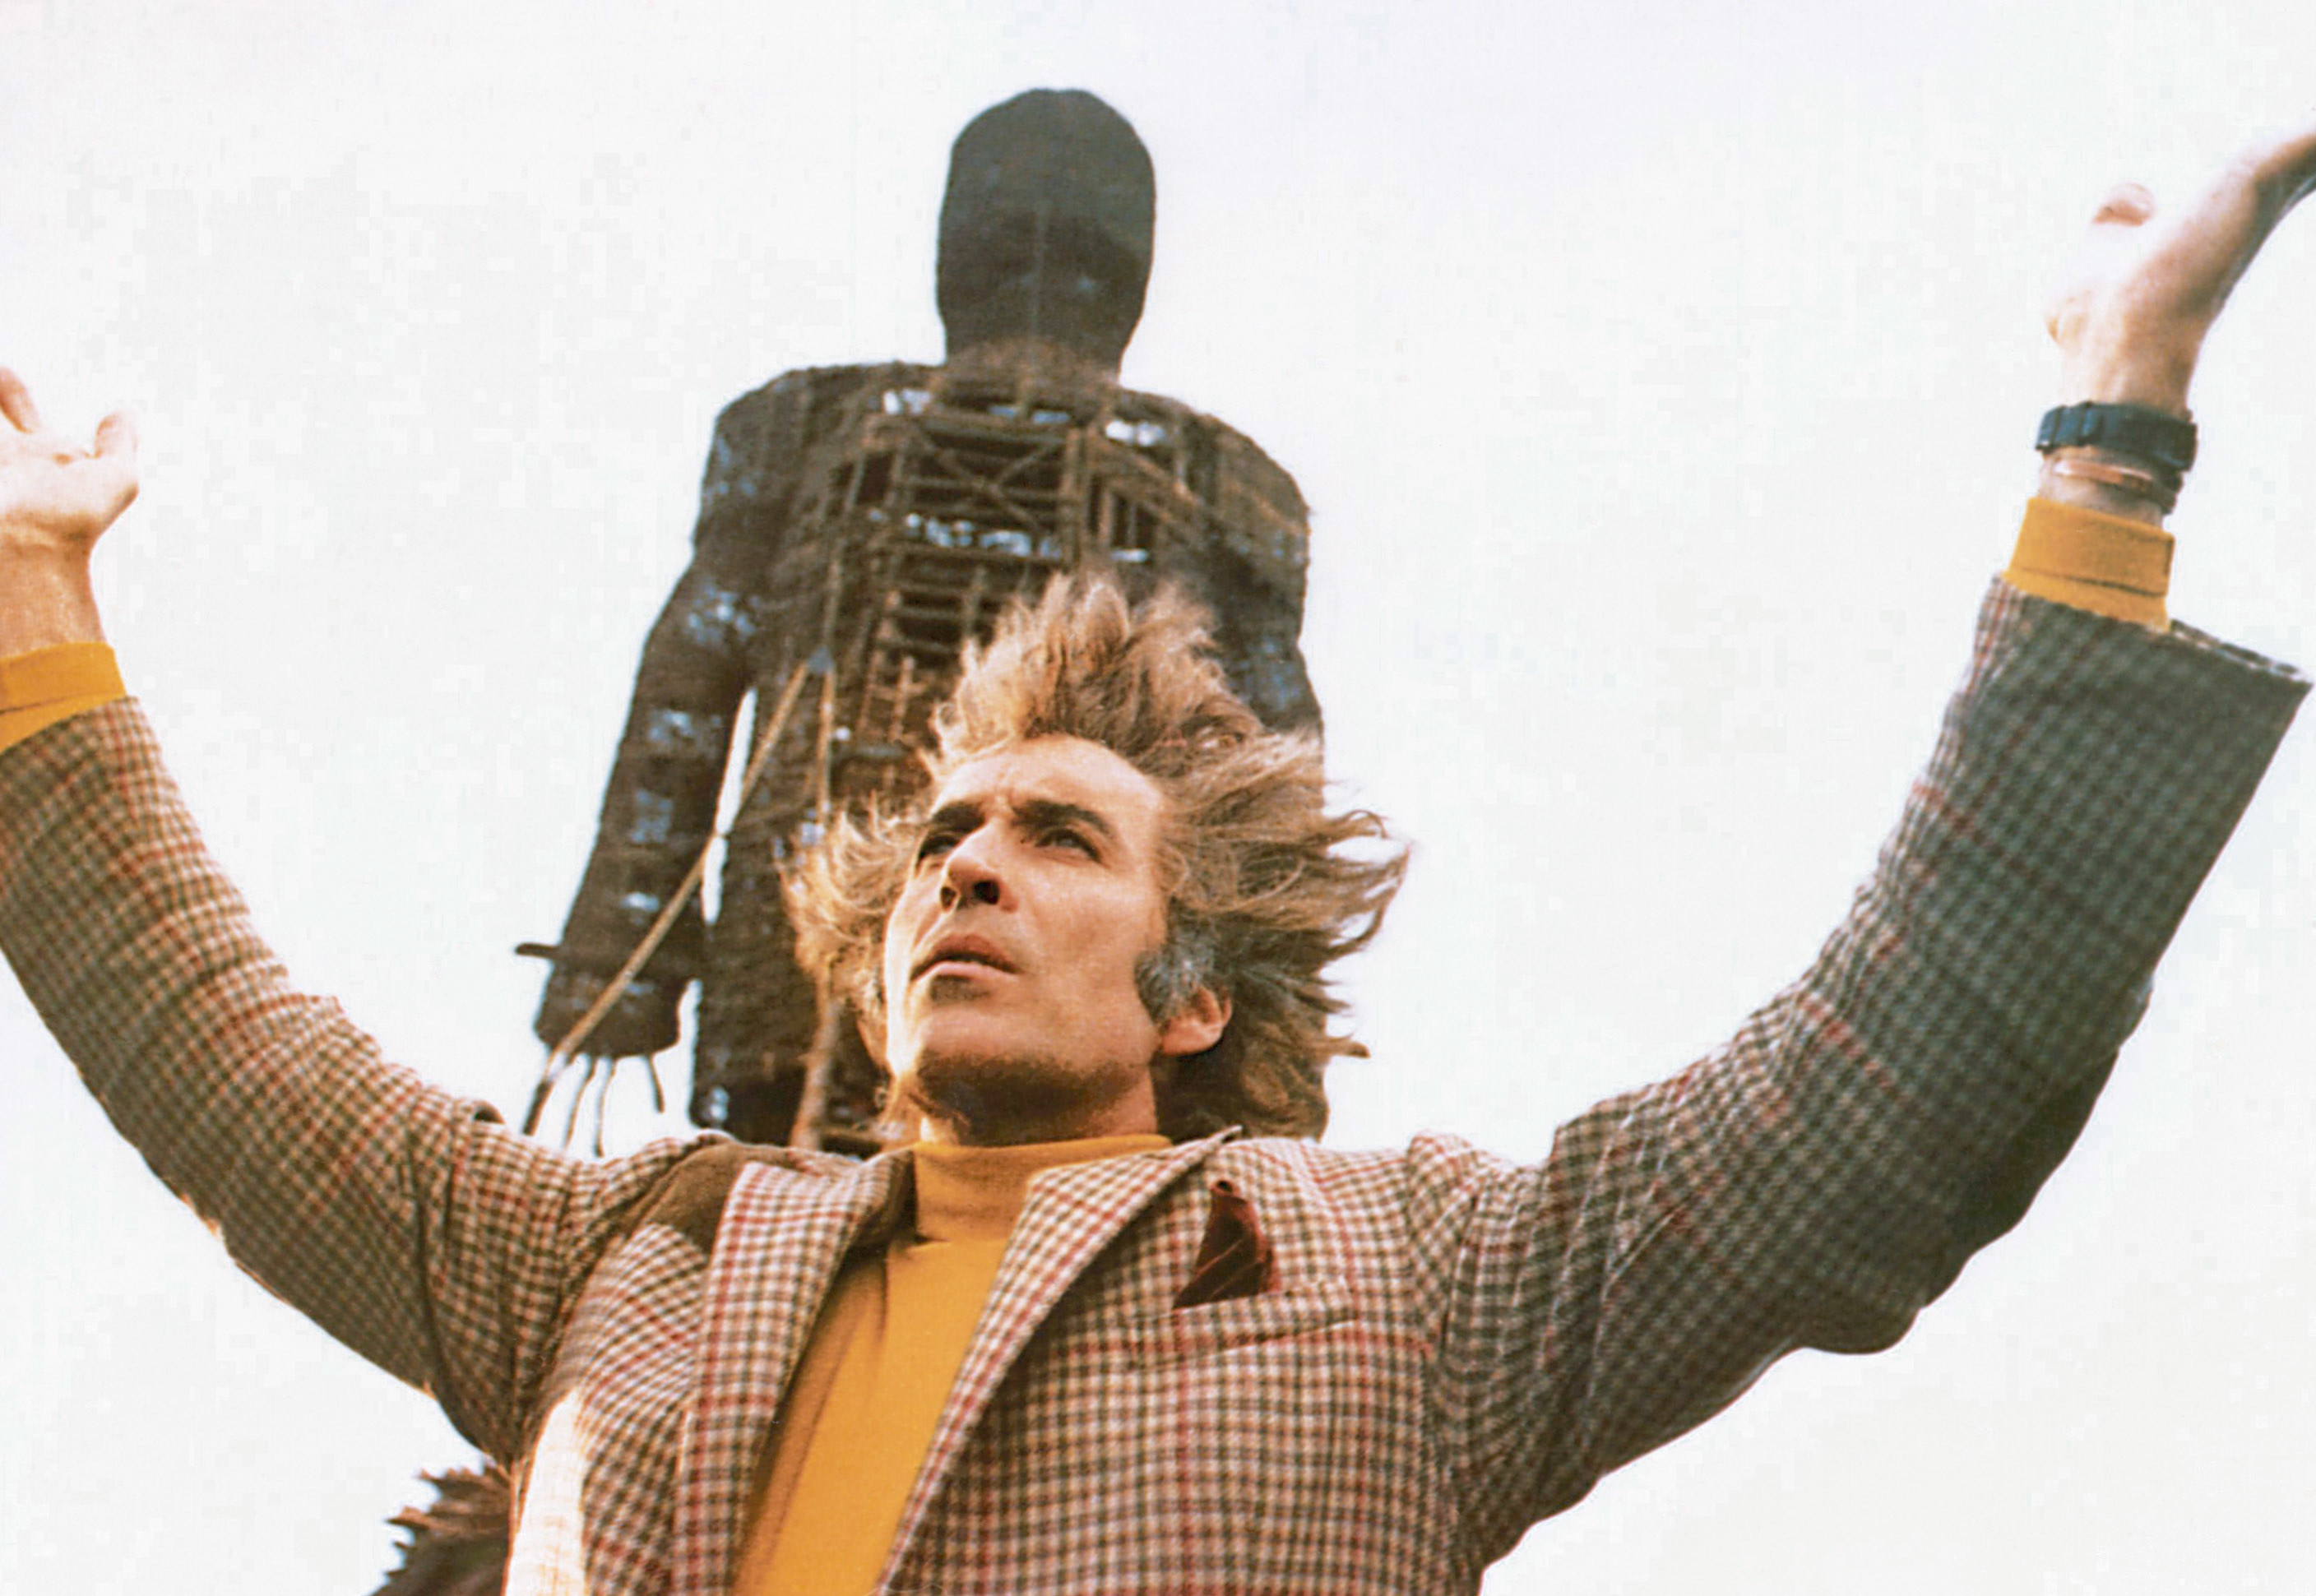 standing in front of the wicker effigy, Summerisle lifts his hands in praise